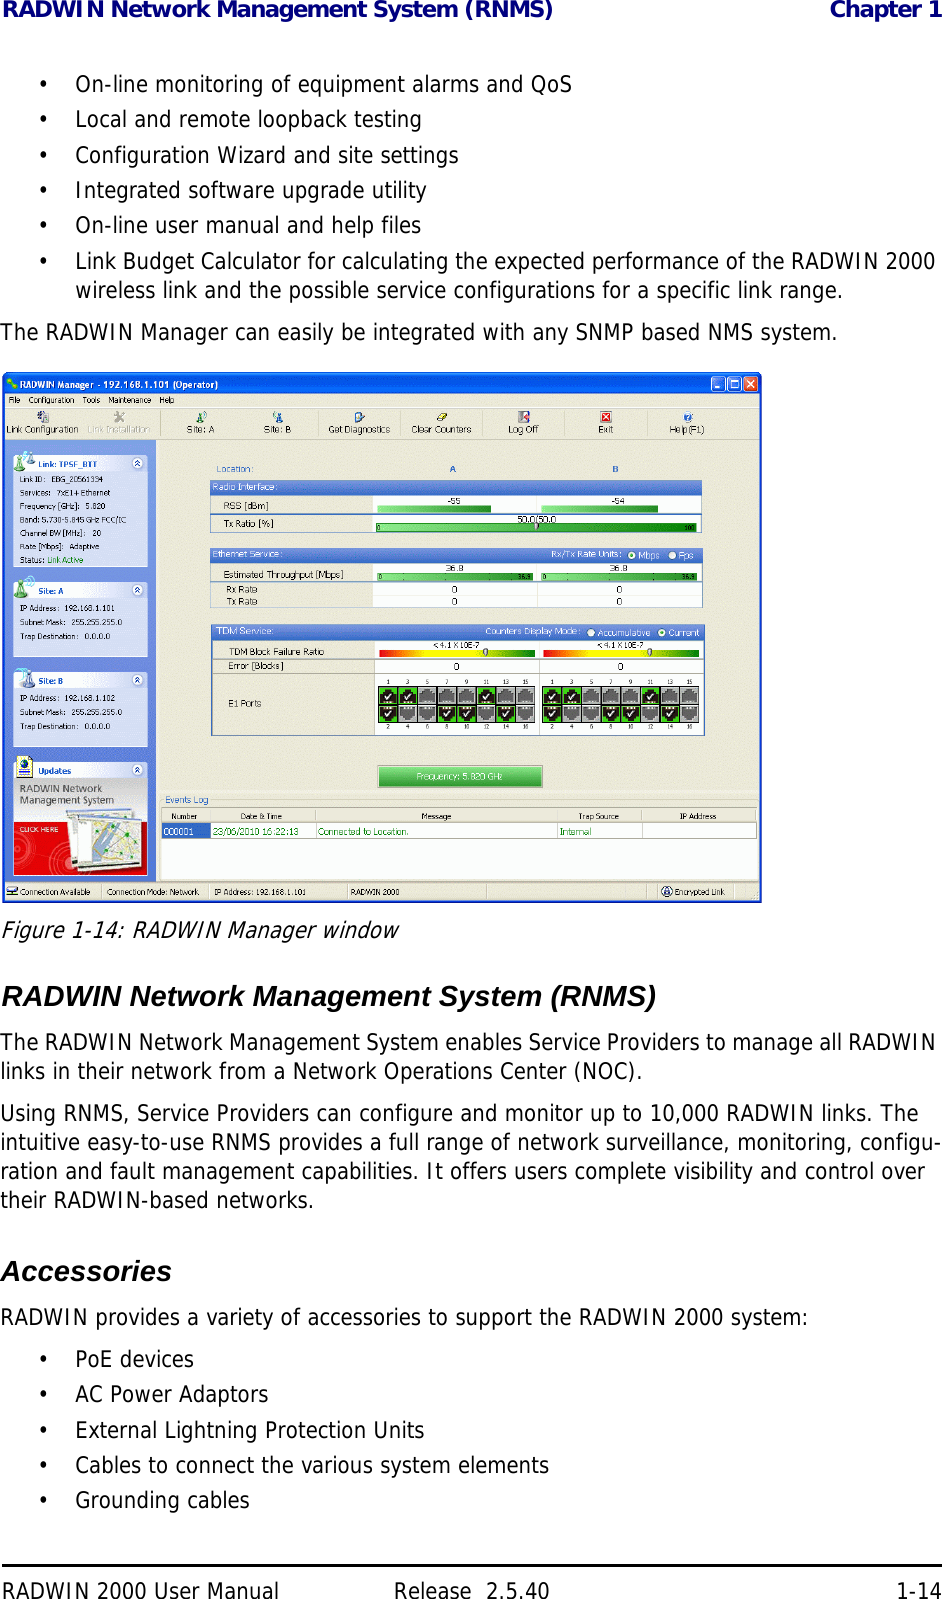 RADWIN Network Management System (RNMS) Chapter 1RADWIN 2000 User Manual Release  2.5.40 1-14• On-line monitoring of equipment alarms and QoS• Local and remote loopback testing• Configuration Wizard and site settings• Integrated software upgrade utility• On-line user manual and help files• Link Budget Calculator for calculating the expected performance of the RADWIN 2000 wireless link and the possible service configurations for a specific link range.The RADWIN Manager can easily be integrated with any SNMP based NMS system.Figure 1-14: RADWIN Manager window  RADWIN Network Management System (RNMS)The RADWIN Network Management System enables Service Providers to manage all RADWIN links in their network from a Network Operations Center (NOC).Using RNMS, Service Providers can configure and monitor up to 10,000 RADWIN links. The intuitive easy-to-use RNMS provides a full range of network surveillance, monitoring, configu-ration and fault management capabilities. It offers users complete visibility and control over their RADWIN-based networks.AccessoriesRADWIN provides a variety of accessories to support the RADWIN 2000 system:•PoE devices• AC Power Adaptors• External Lightning Protection Units• Cables to connect the various system elements• Grounding cables